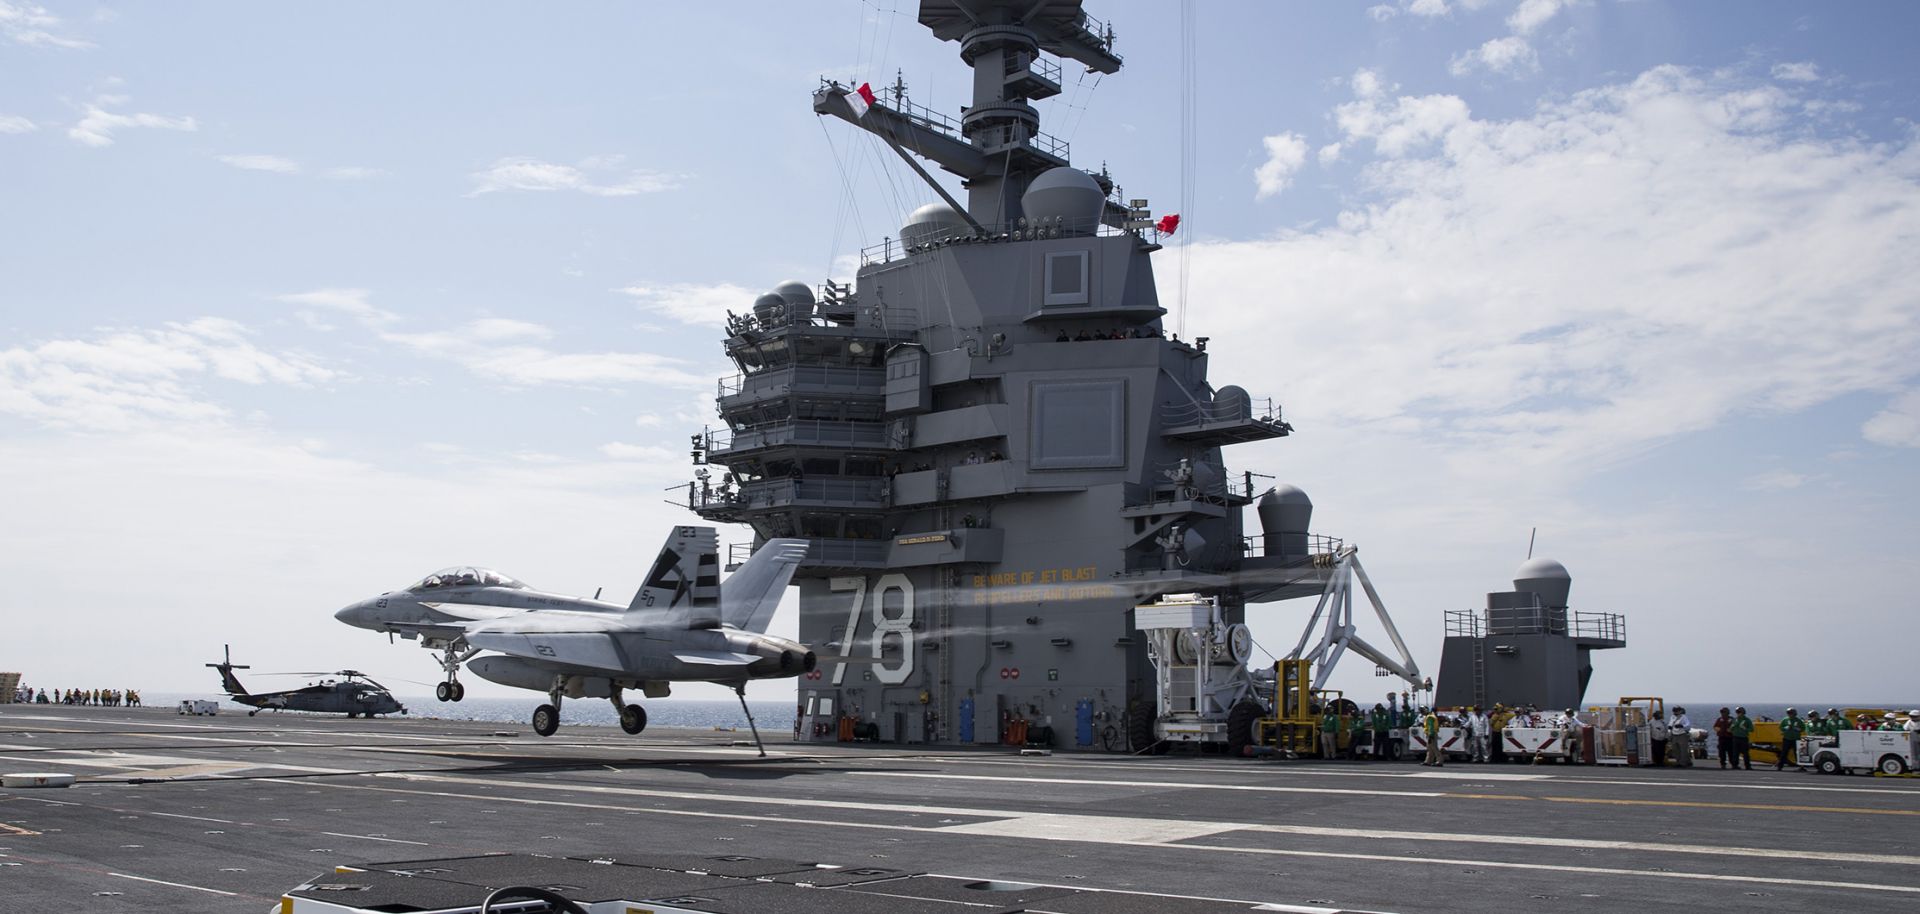 This picture shows the newest and most advanced carrier in the U.S. fleet, the USS Gerald R. Ford (CVN-78).